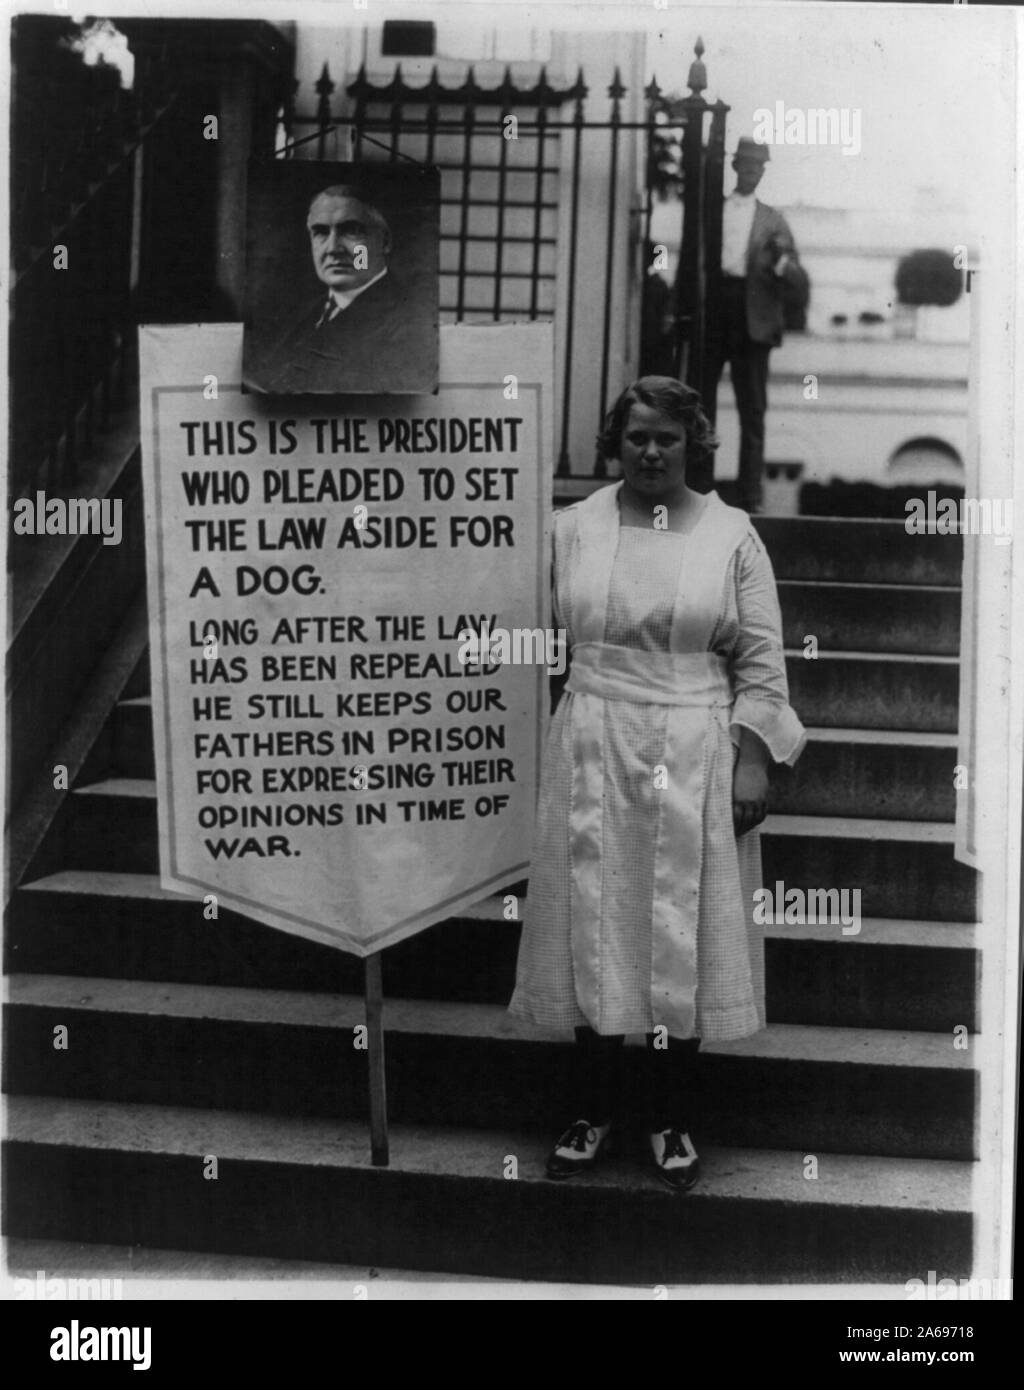 Young women picketing outside White House gates for amnesty for war protesters - sign, with portrait of Harding, reads: This is the president who pleaded to set the law aside for a dog. Long after the law has been repealed he still keeps our fathers in prison for expressing their opinions in time of war Stock Photo